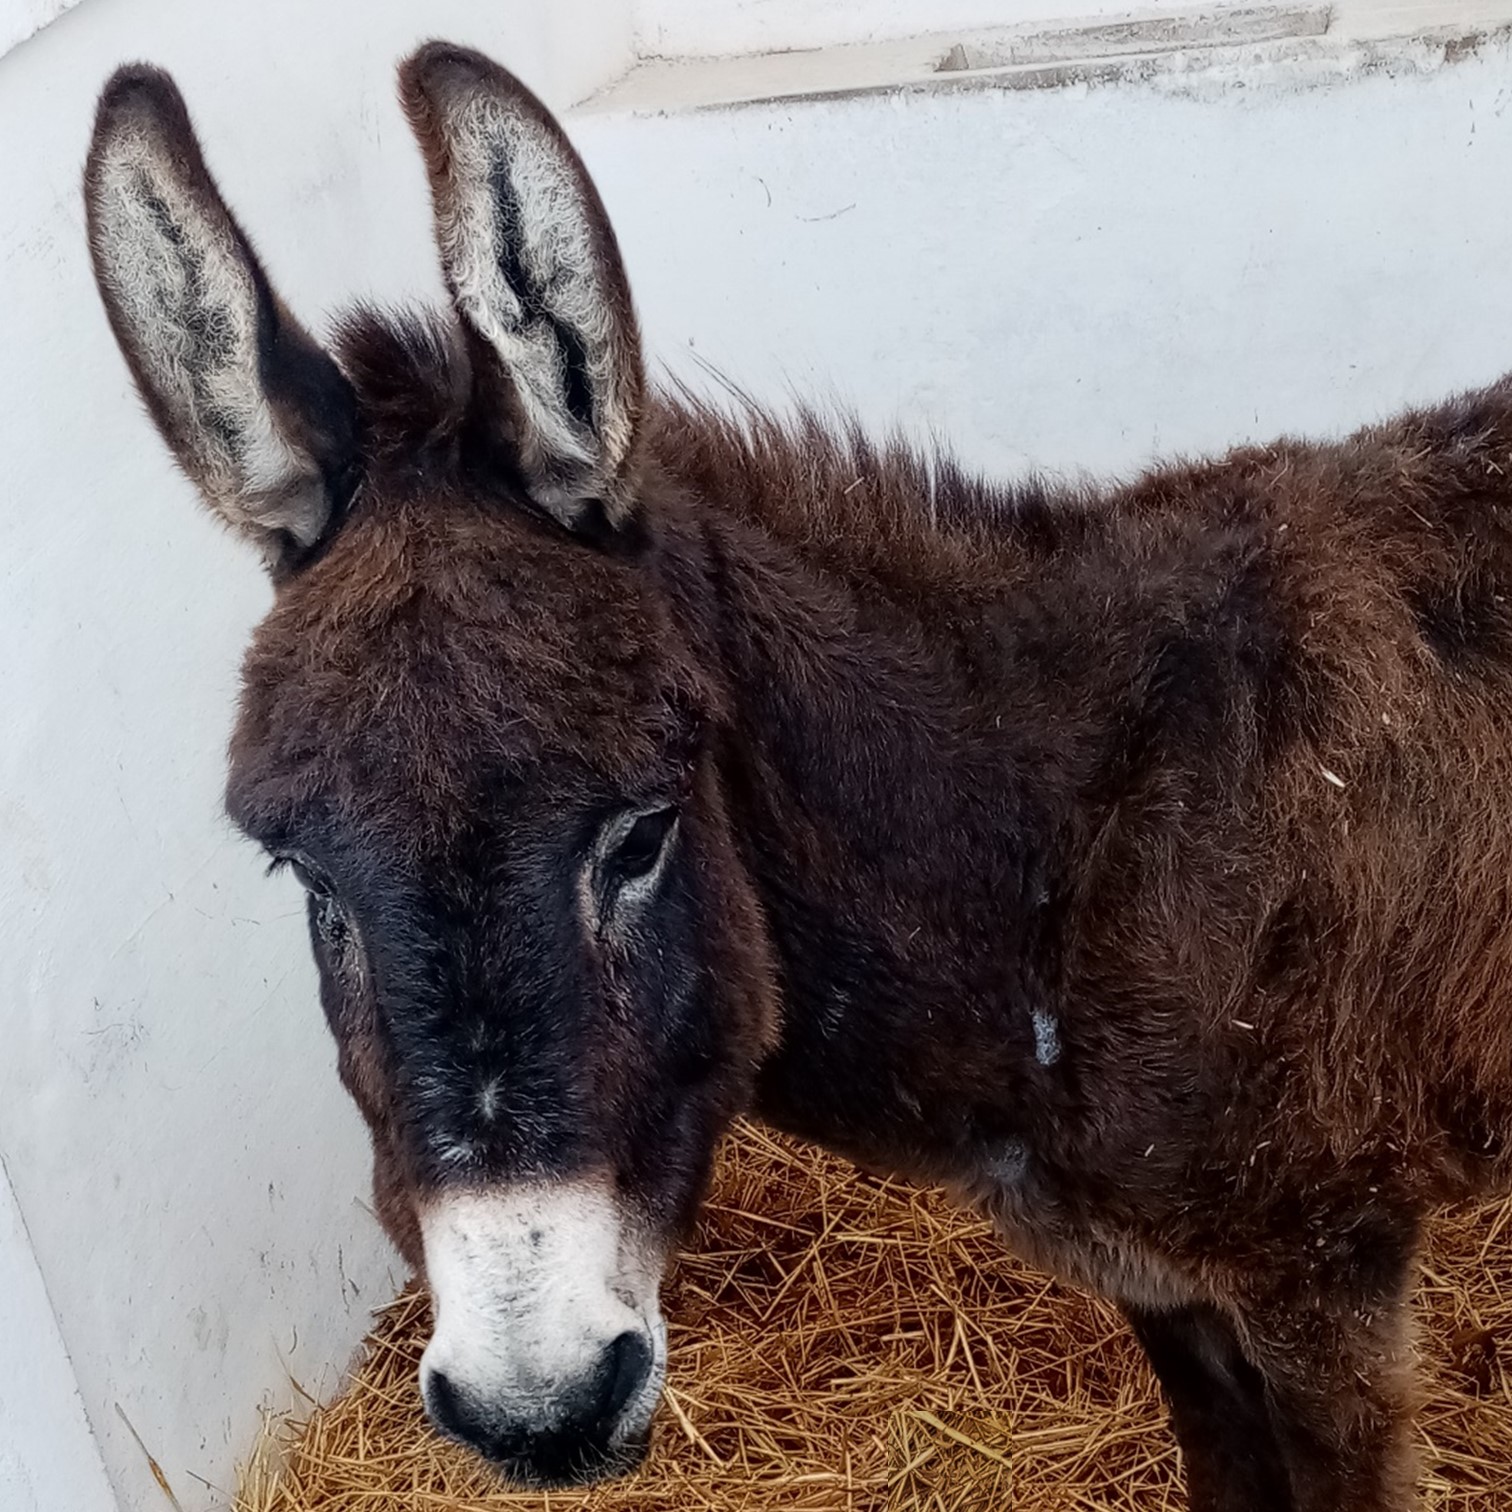 Brown donkey in a stable